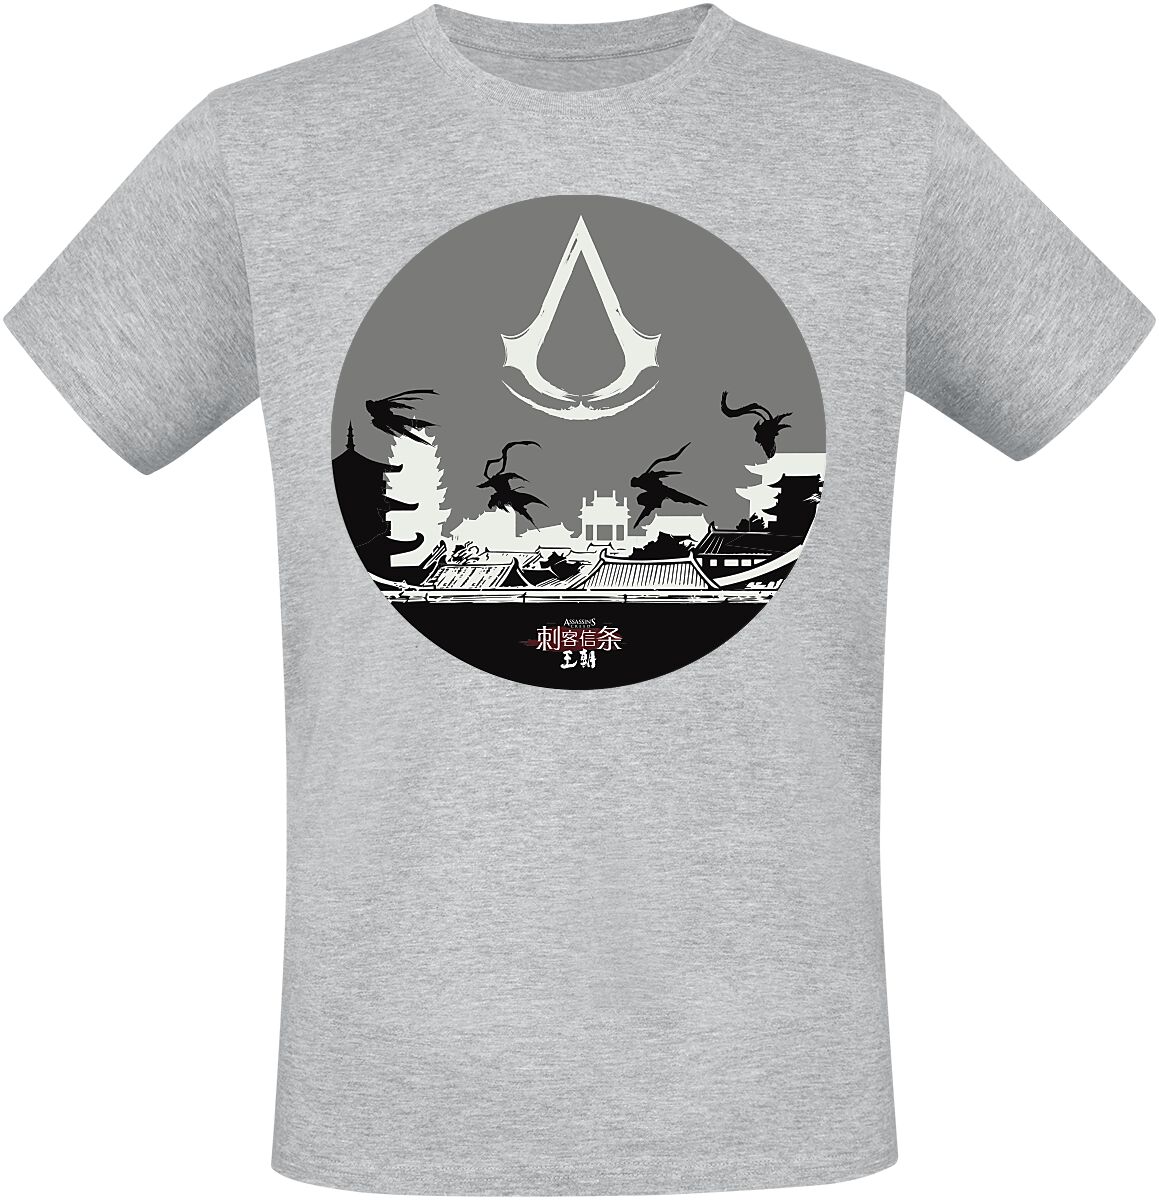 Assassin`s Creed Dynasty - Circle T-Shirt grau meliert in L